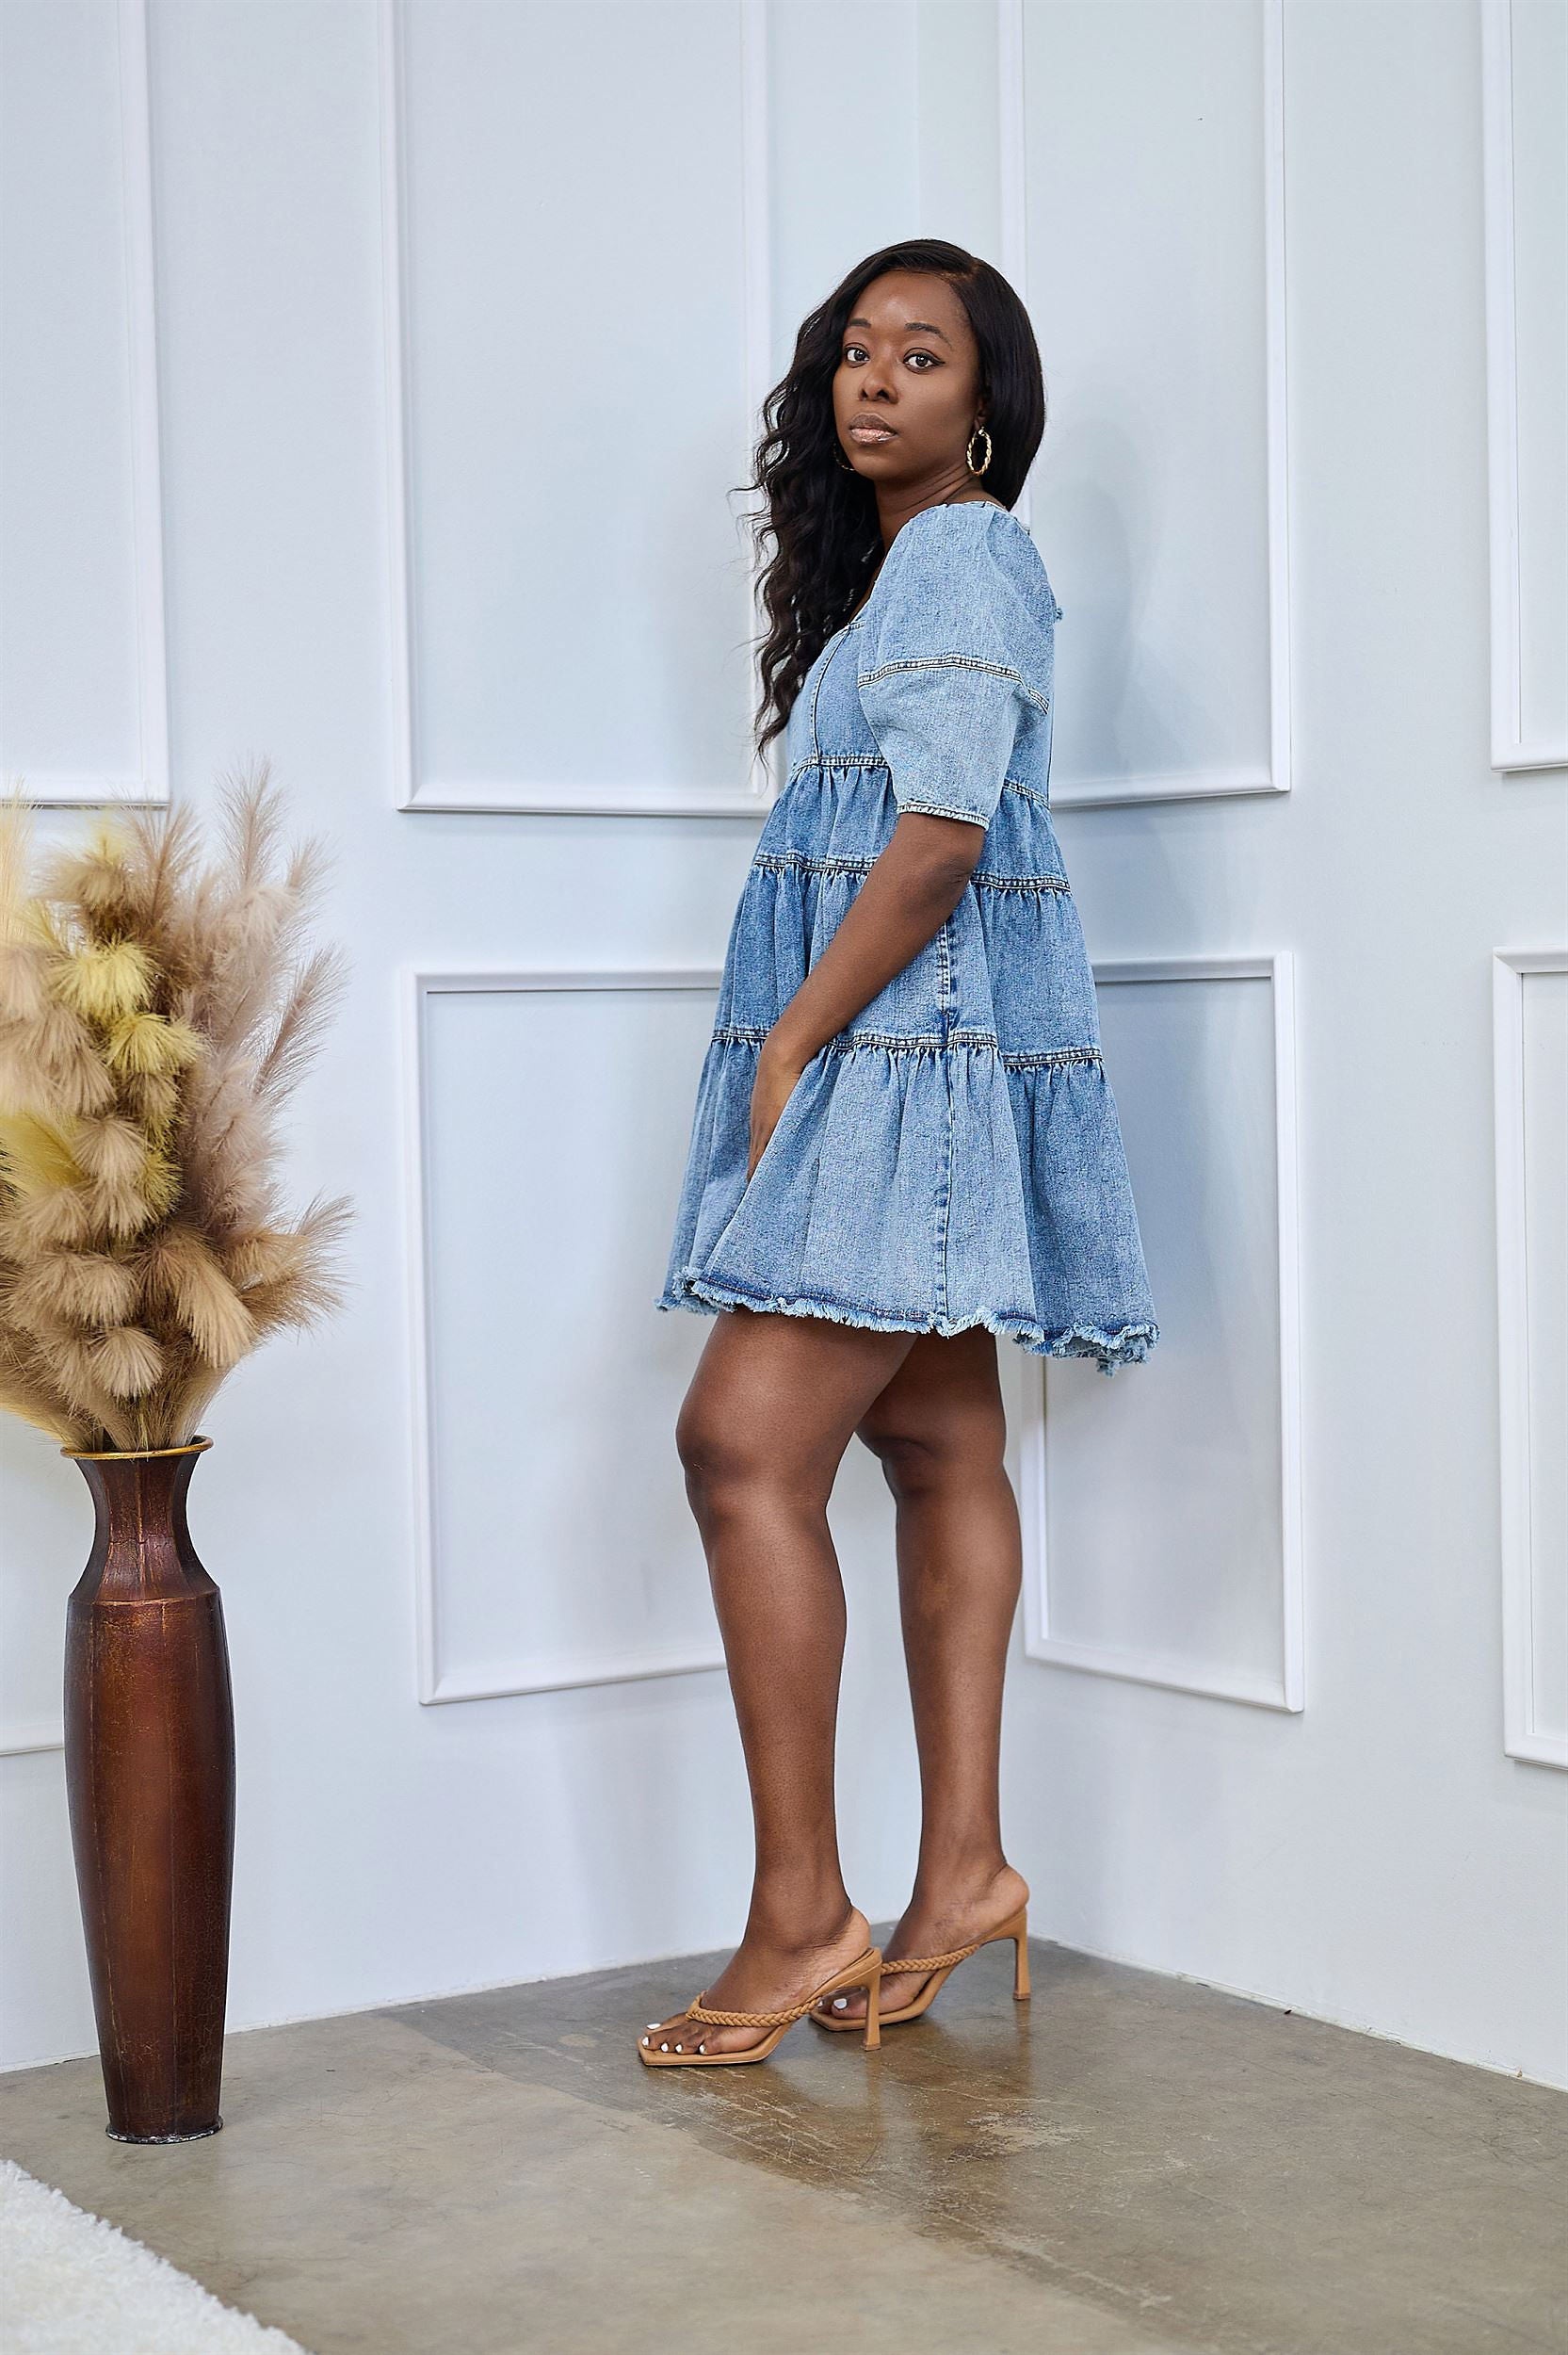 Hot Miami Styles - Luxe and flattering, this denim skater fit dress will  give your off-duty days the ultra-chic look you were looking for. Dress:  $37.99  http://www.hotmiamistyles.com/Denim_Belted_Skater_Dress_p/d830denim.htm |  Facebook